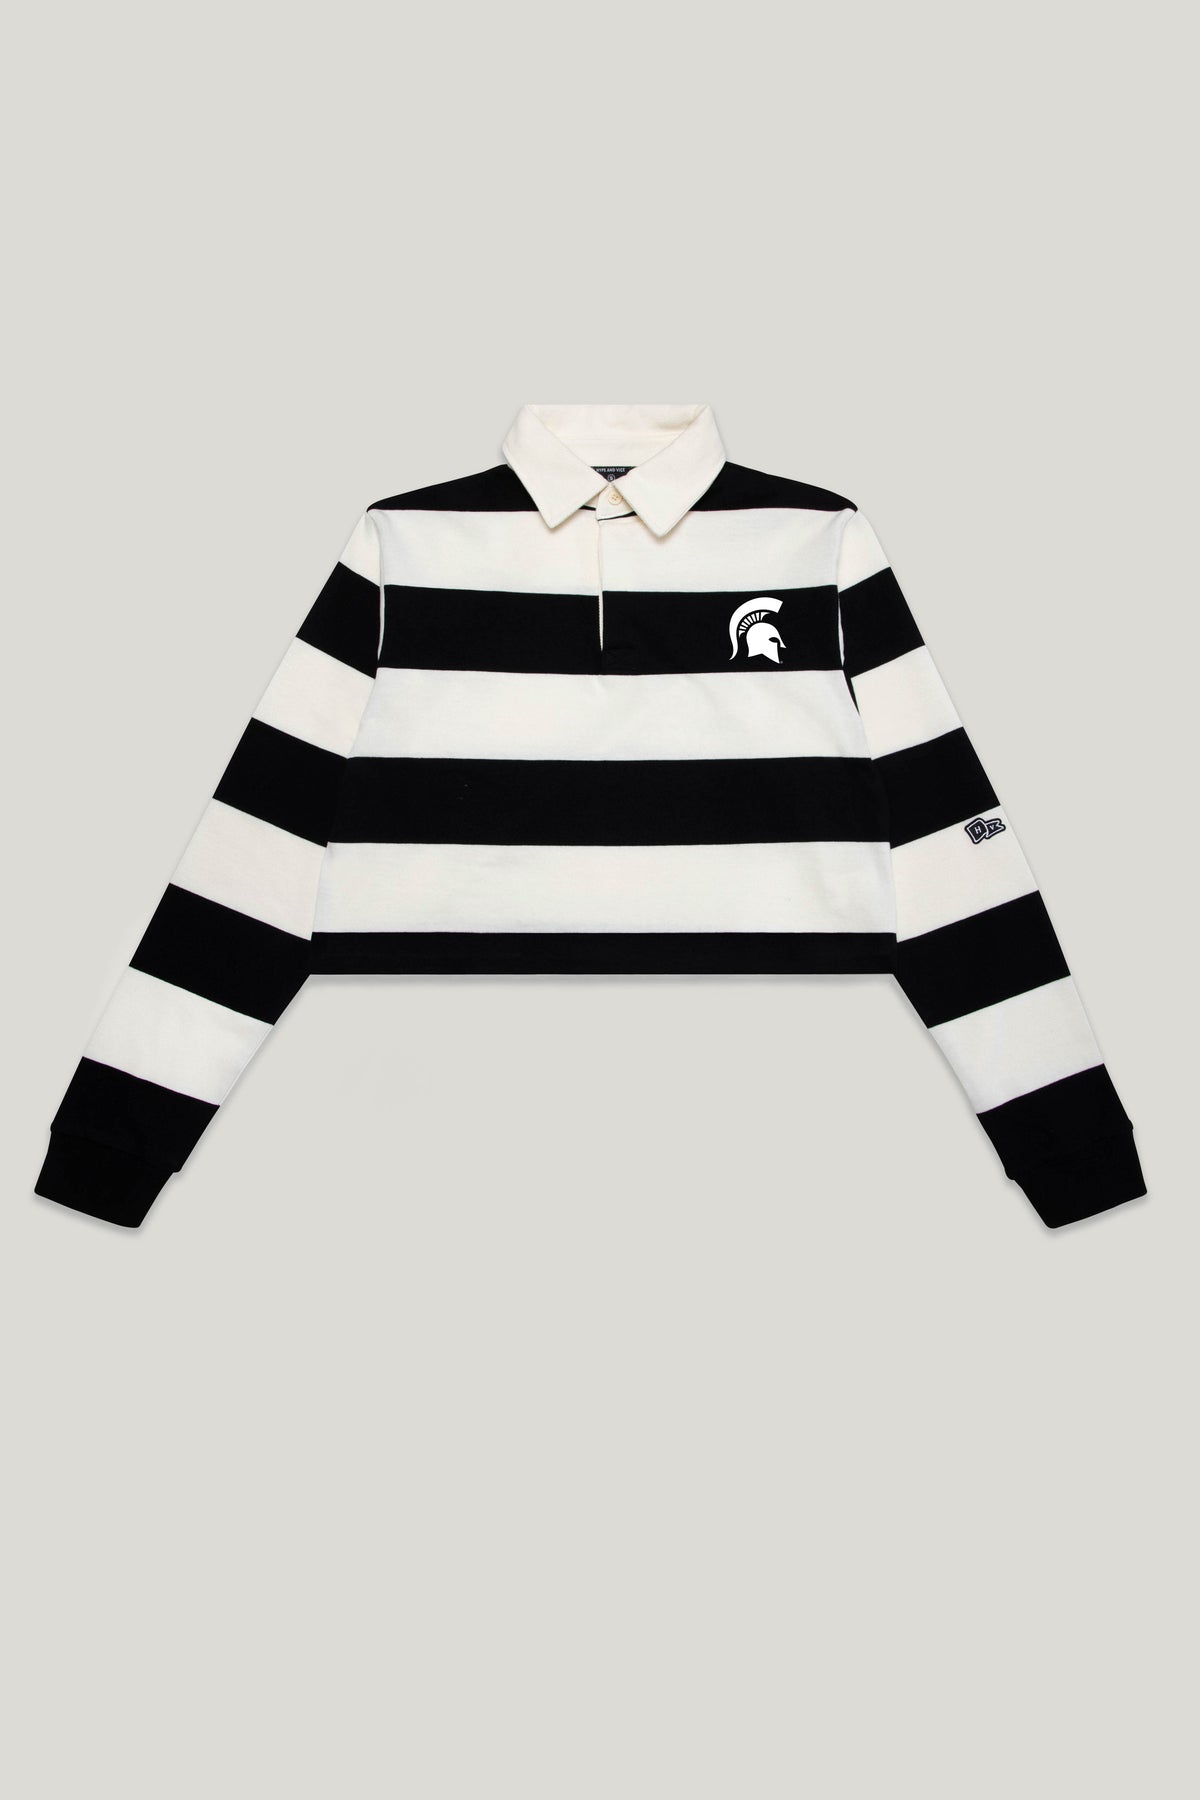 Michigan State Rugby Top